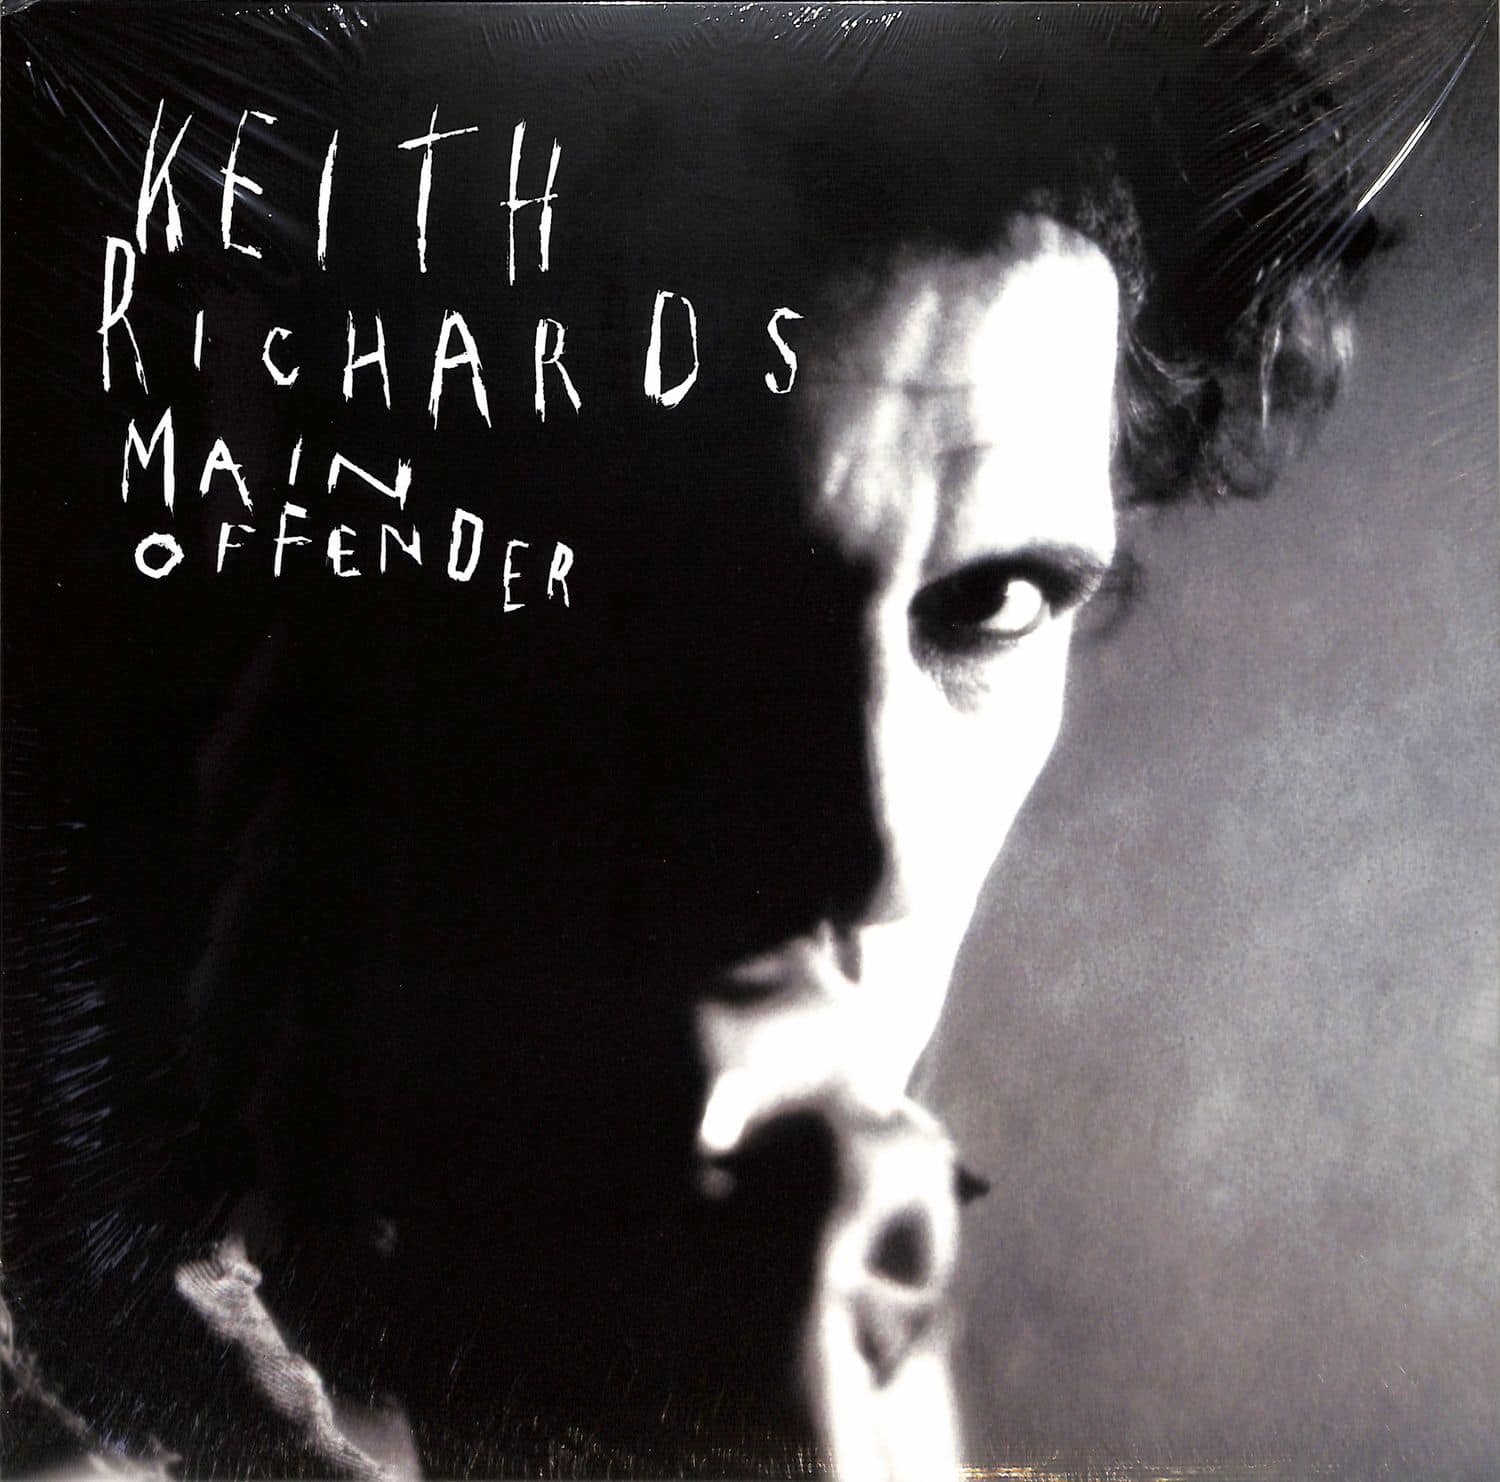 Keith Richards - MAIN OFFENDER 